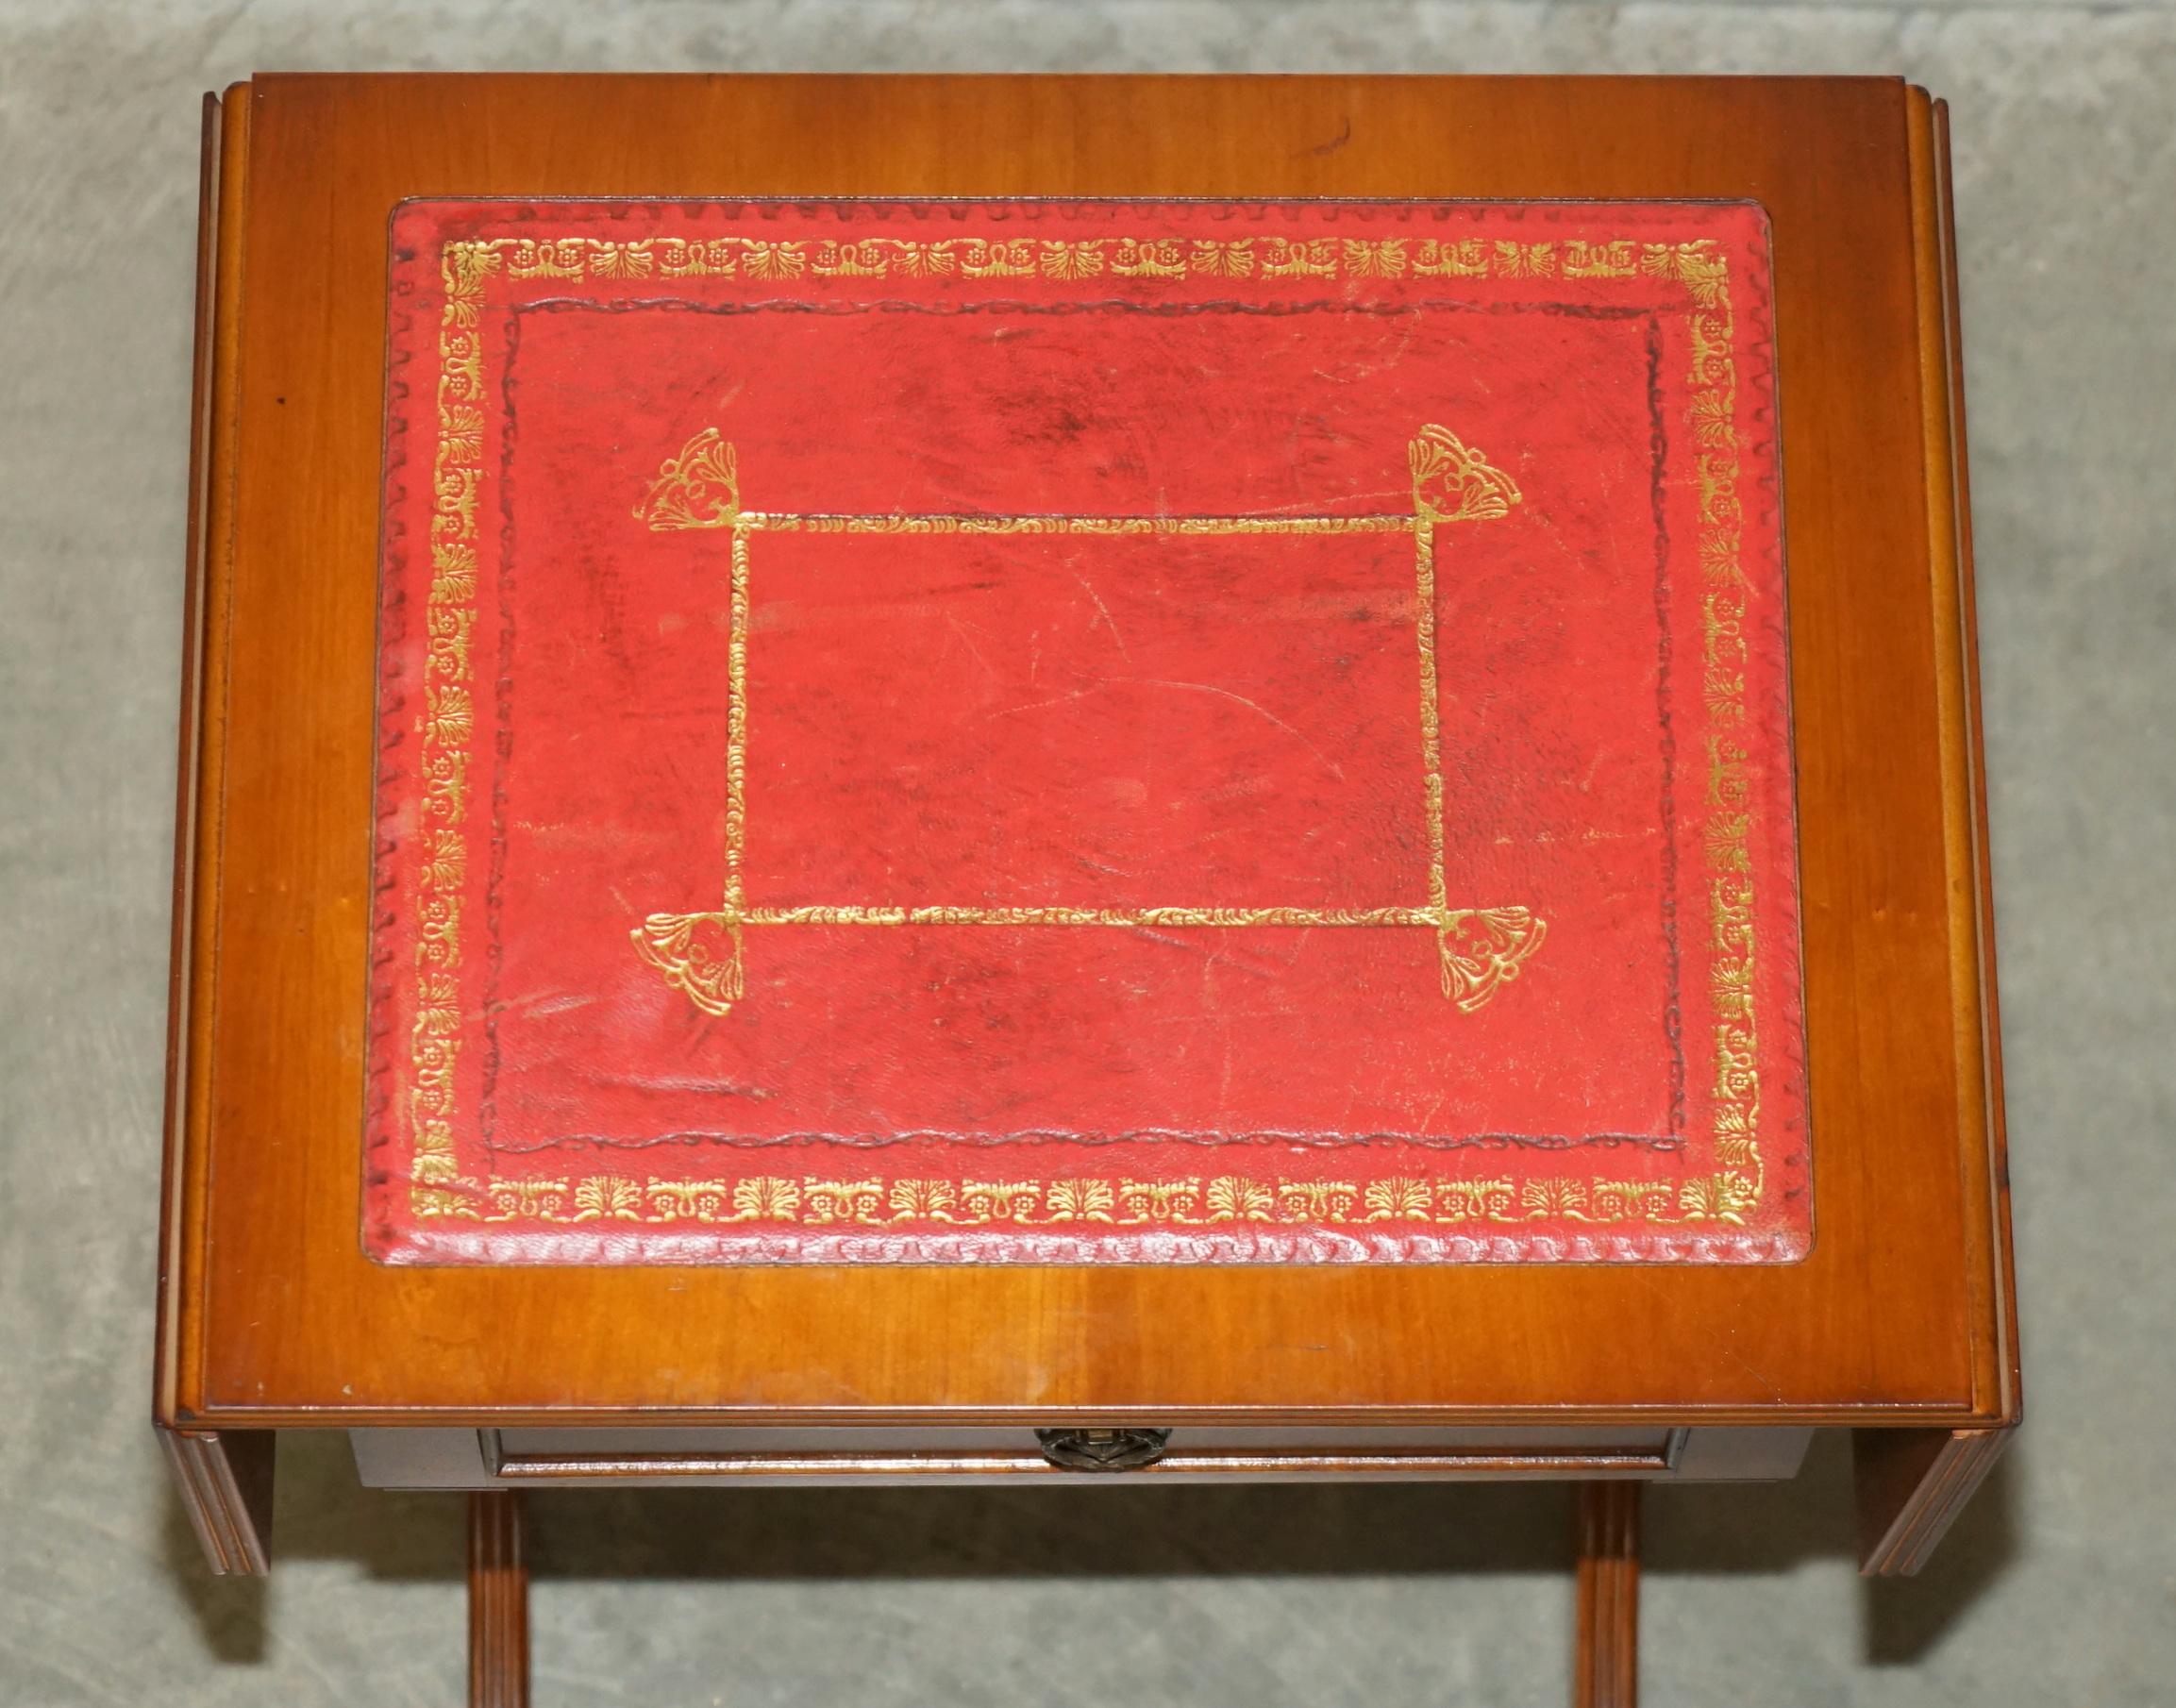 LOVELY ViNTAGE OXBLOOD LEATHER EXTENDING SIDE TABLE WITH GOLD LEAF INLAY For Sale 3